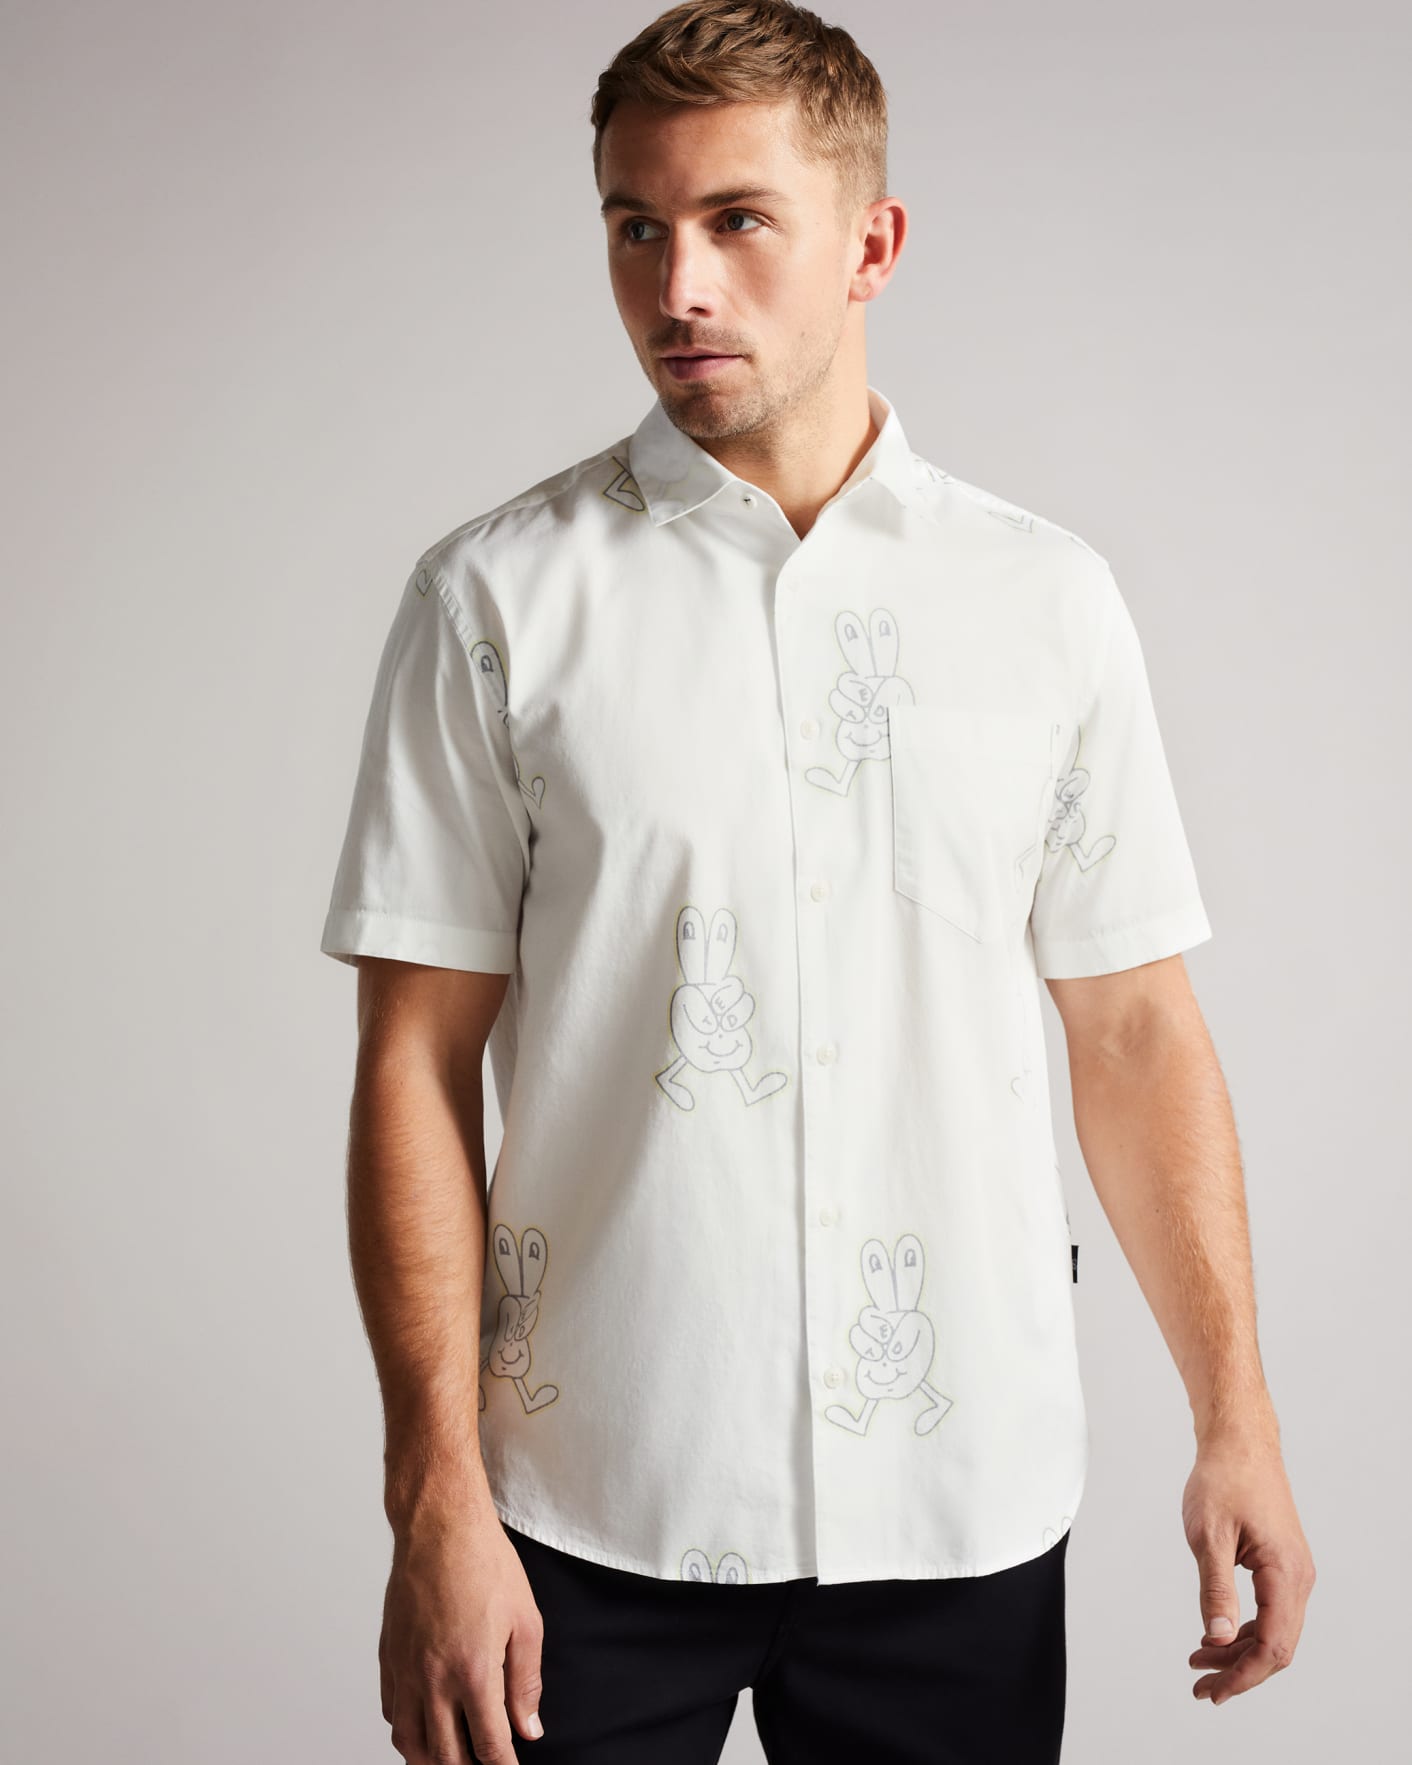 White SS Reverse Printed Character Shirt Ted Baker